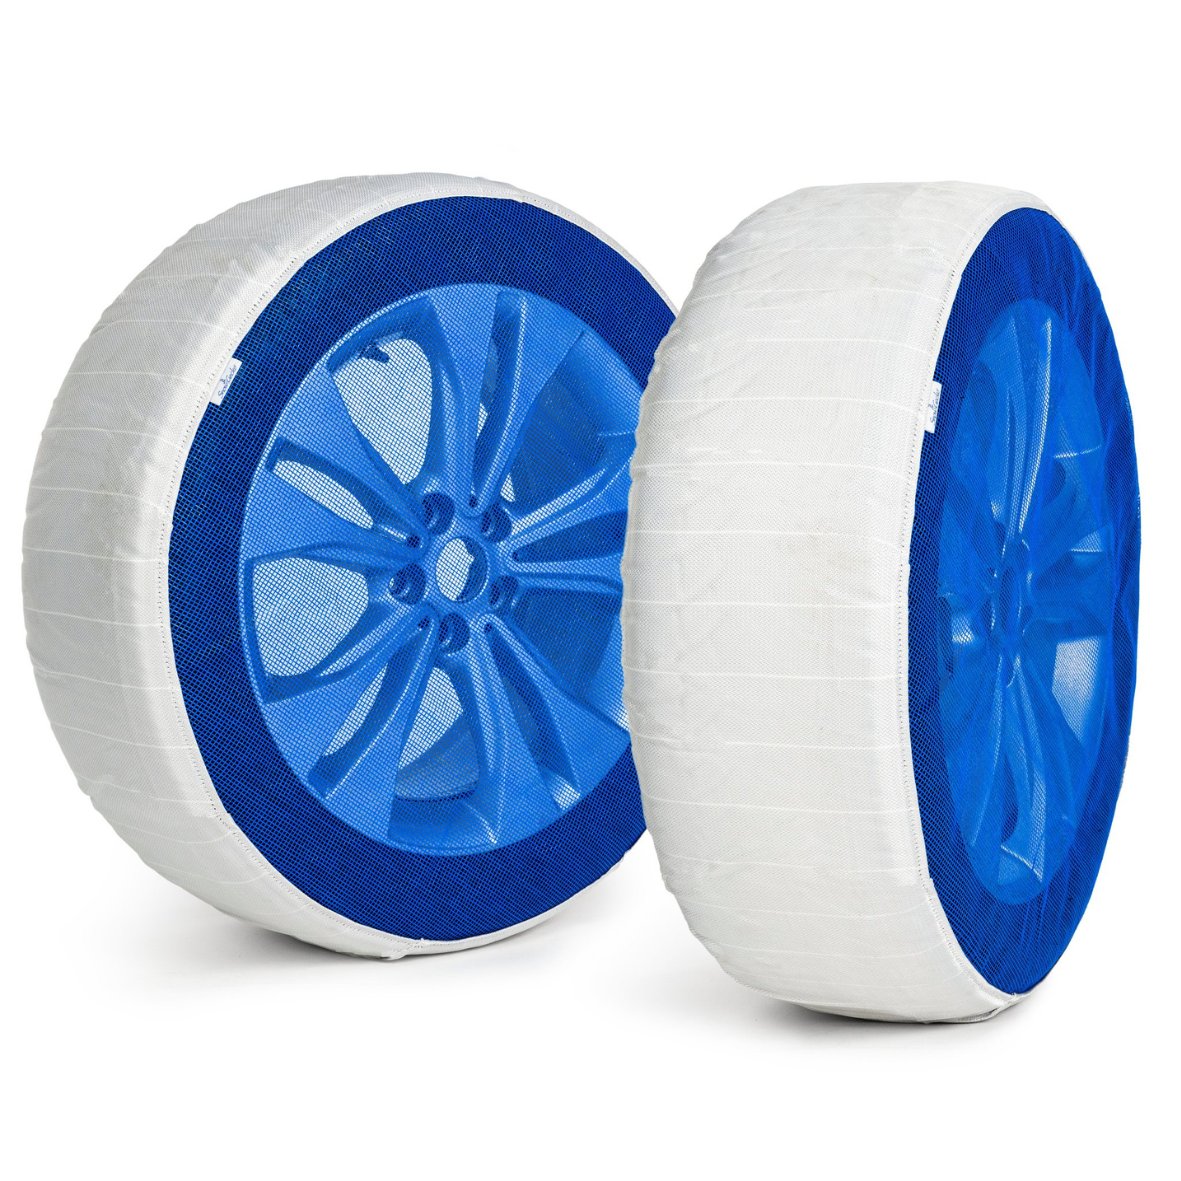 Pair of SnowGecko M Medium textile snow chains installed on two wheels in front of white background showing product frontside 